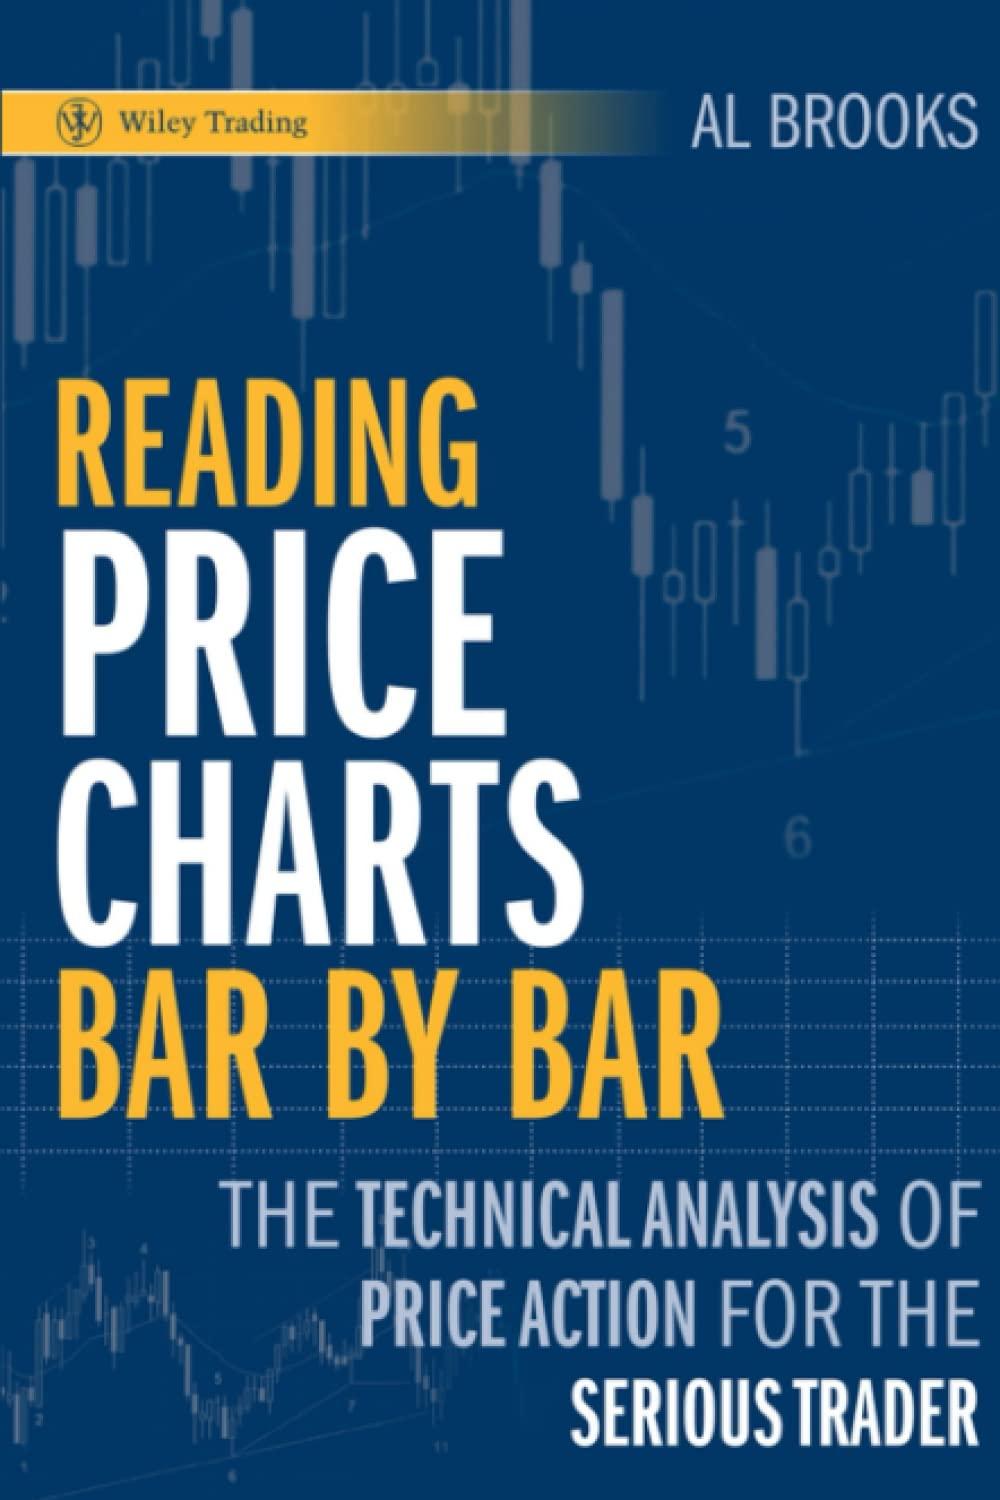 reading price charts bar by bar the technical analysis of price action for the serious trader 1st edition al